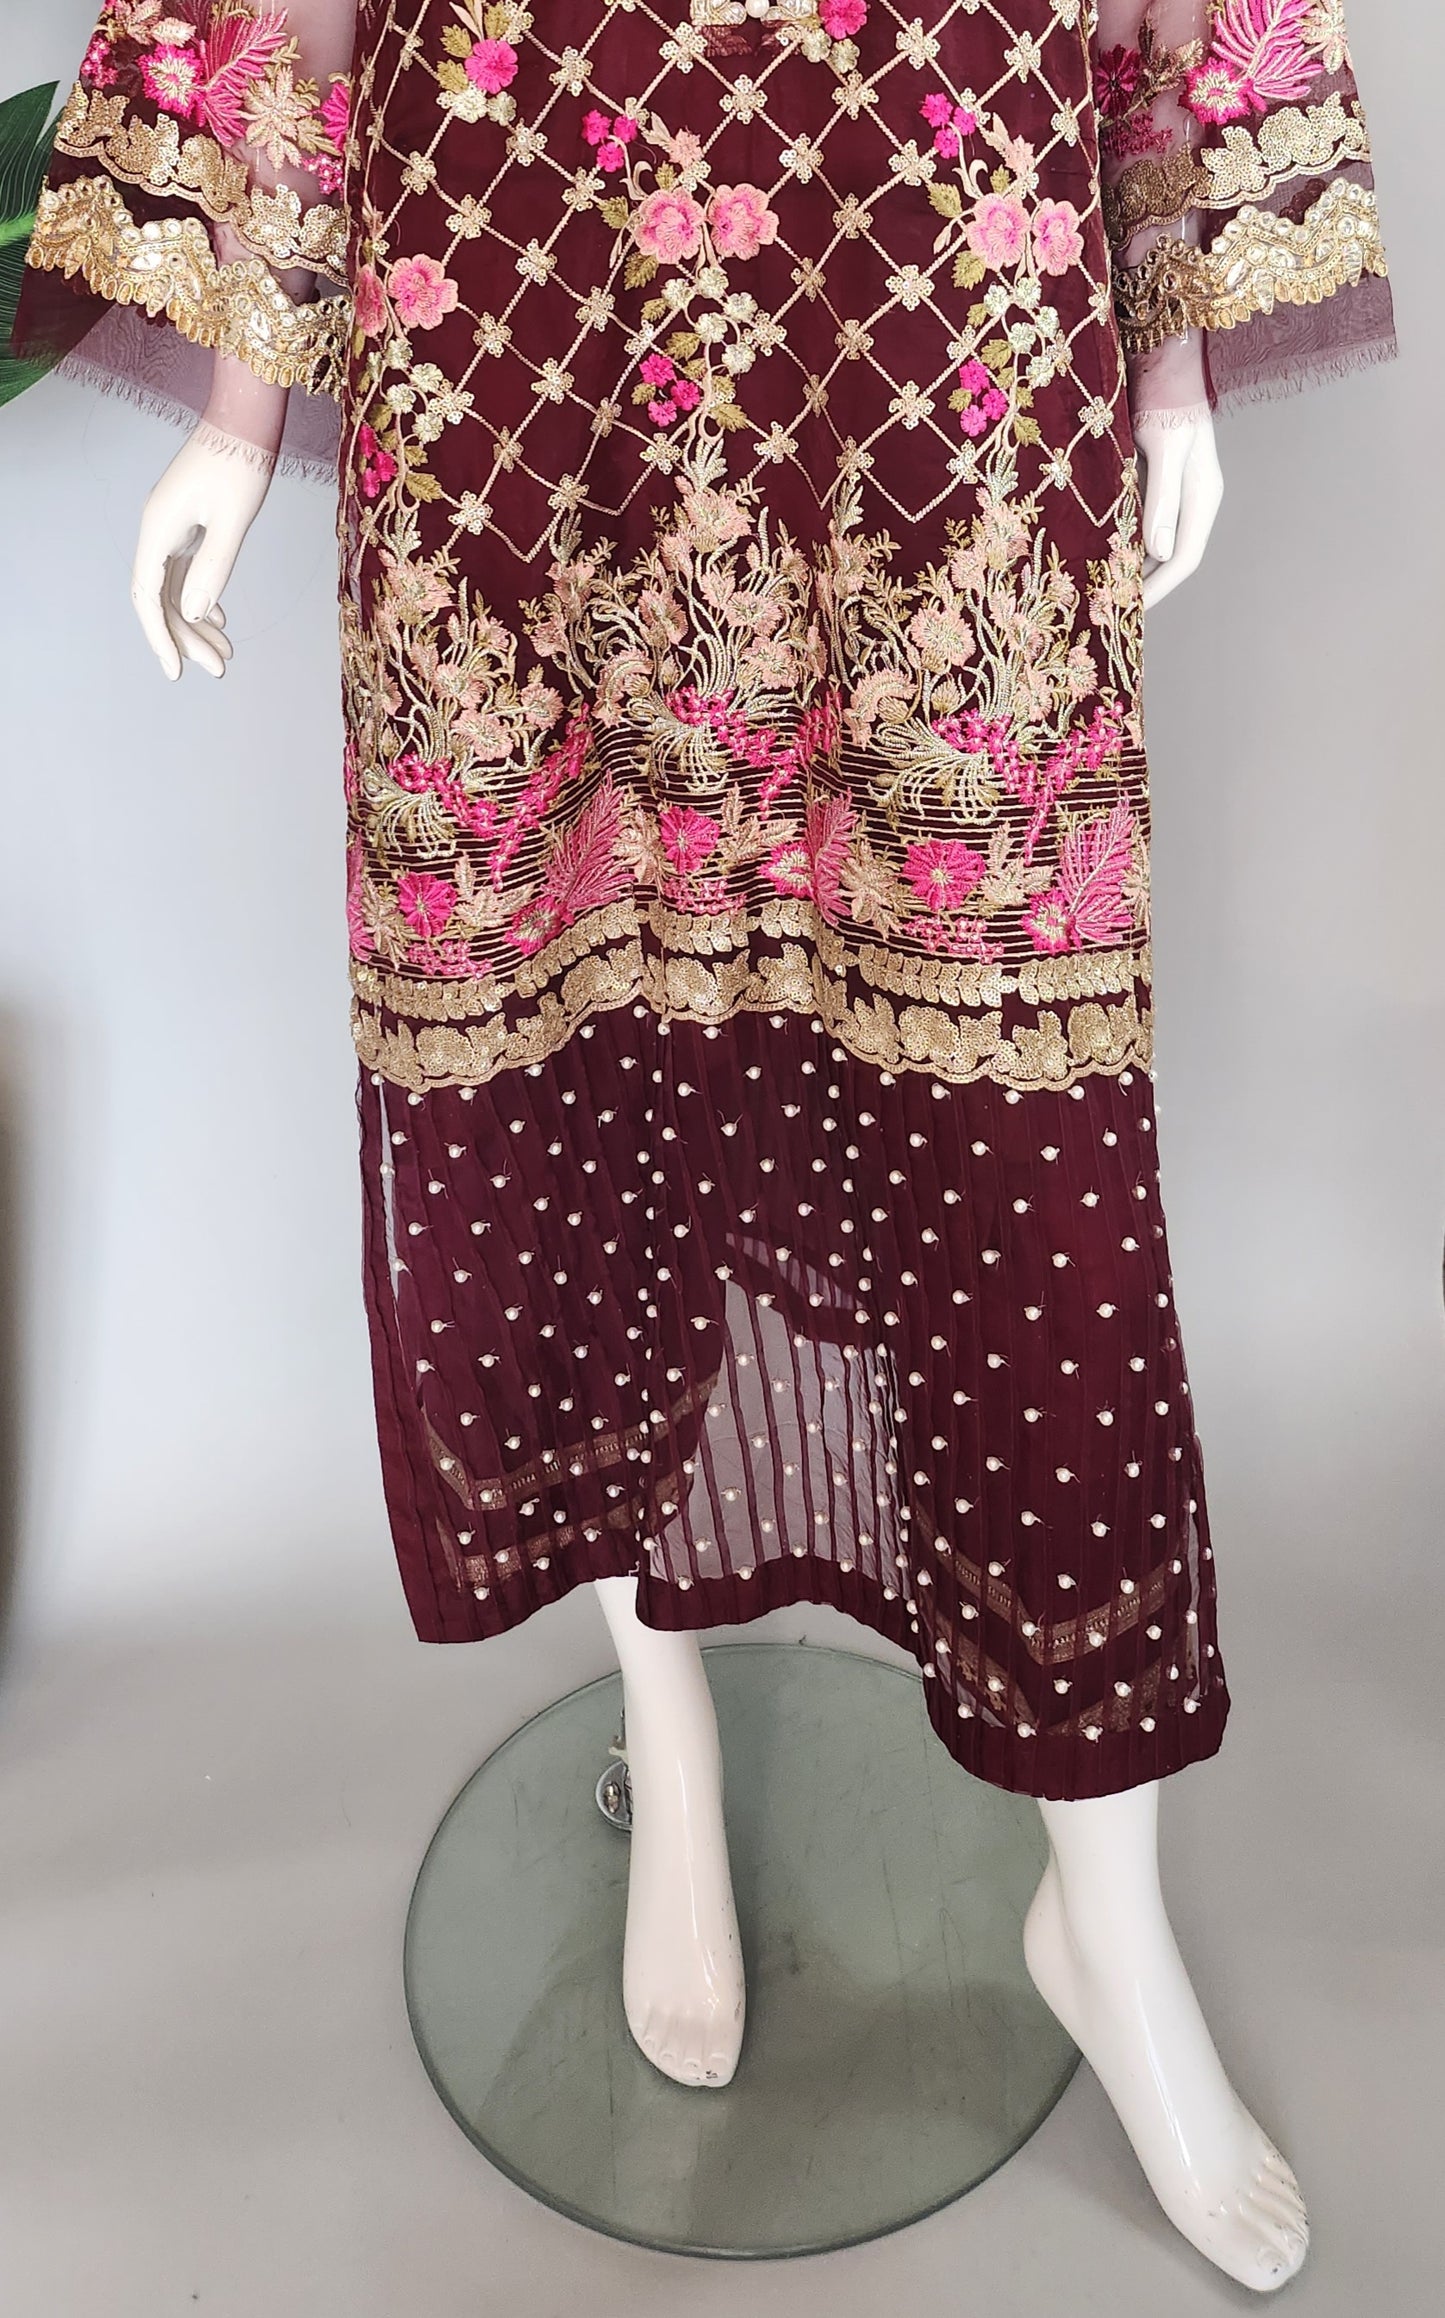 SADAF AHMAD - Maroon Organza Formal with pink flower embroidery and foil works top + pants +dupatta